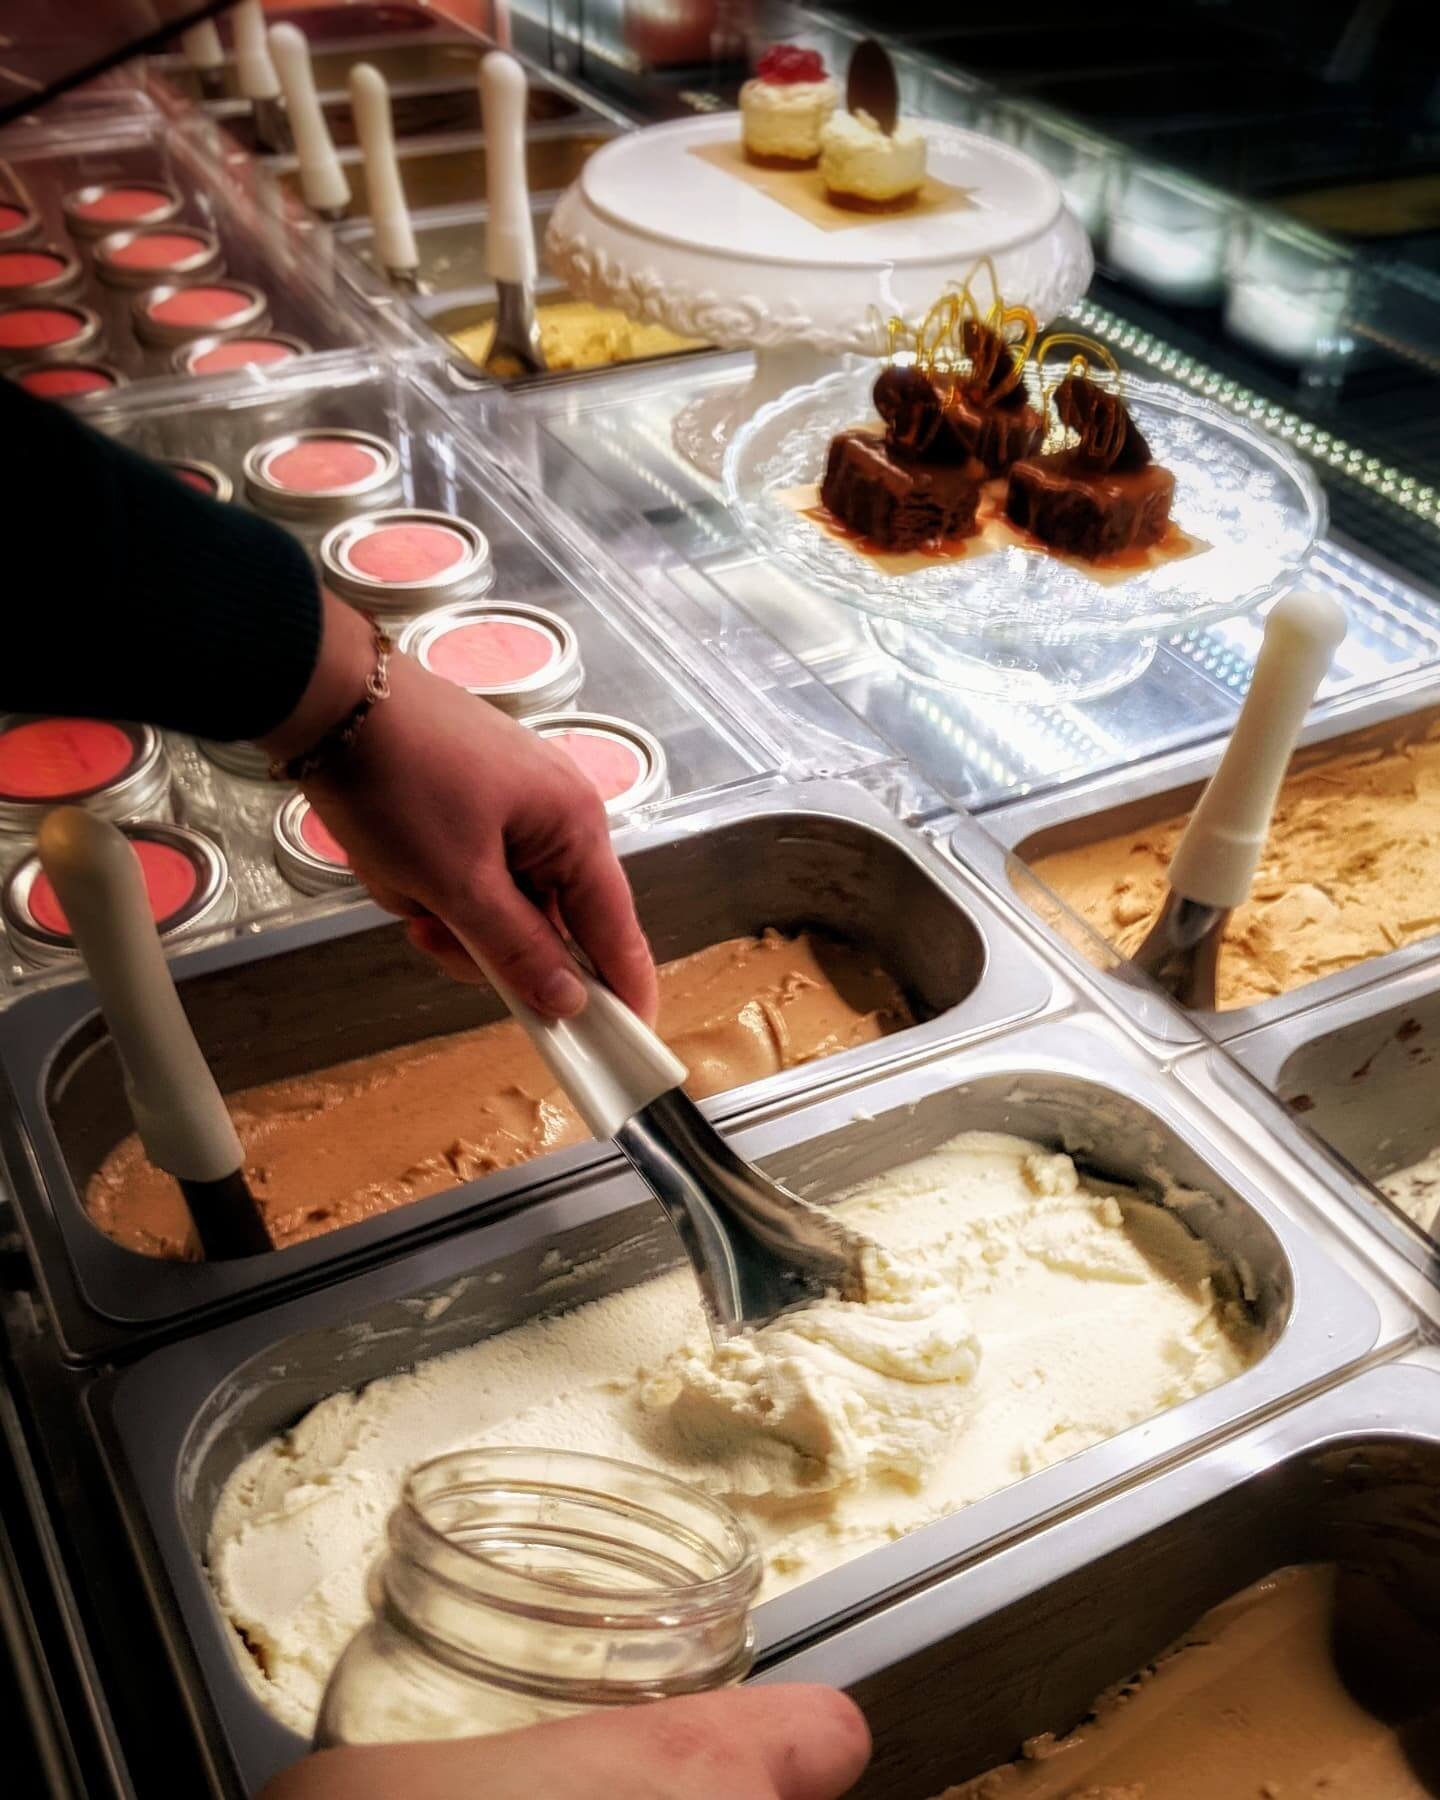 Traditional, authentic, handmade gelato with natural ingredients shown in a case with other desserts at Gina's Gelato in Nelson, BC